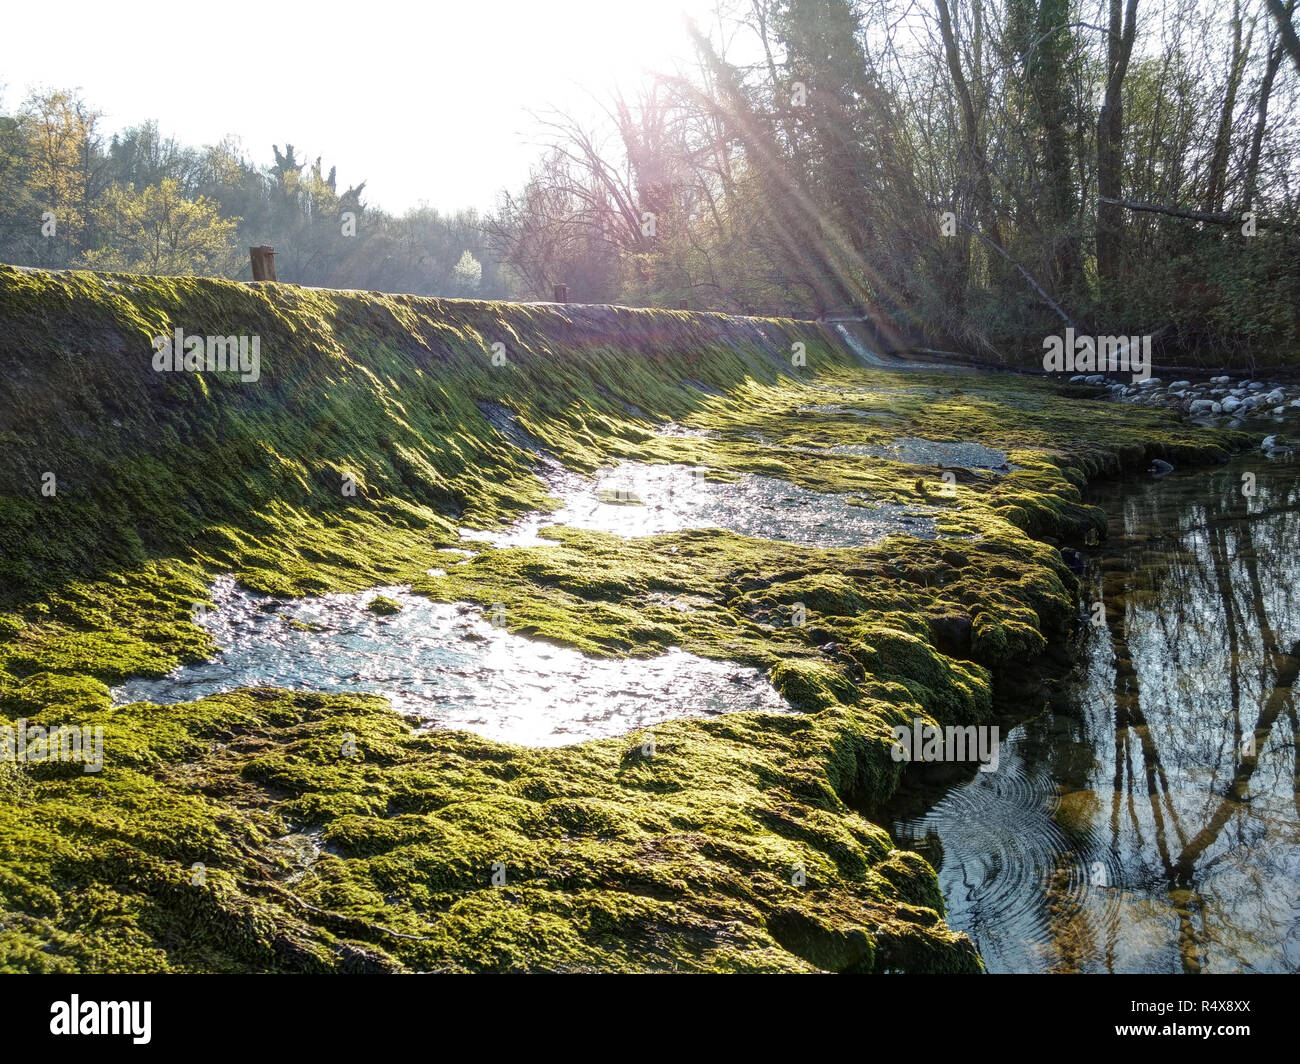 The Naviglio Langosco artifical canal dyke during spring at sunser, with moss, pebbles and puddles in backlight, in Ticino reserve, Galliate, Italy Stock Photo